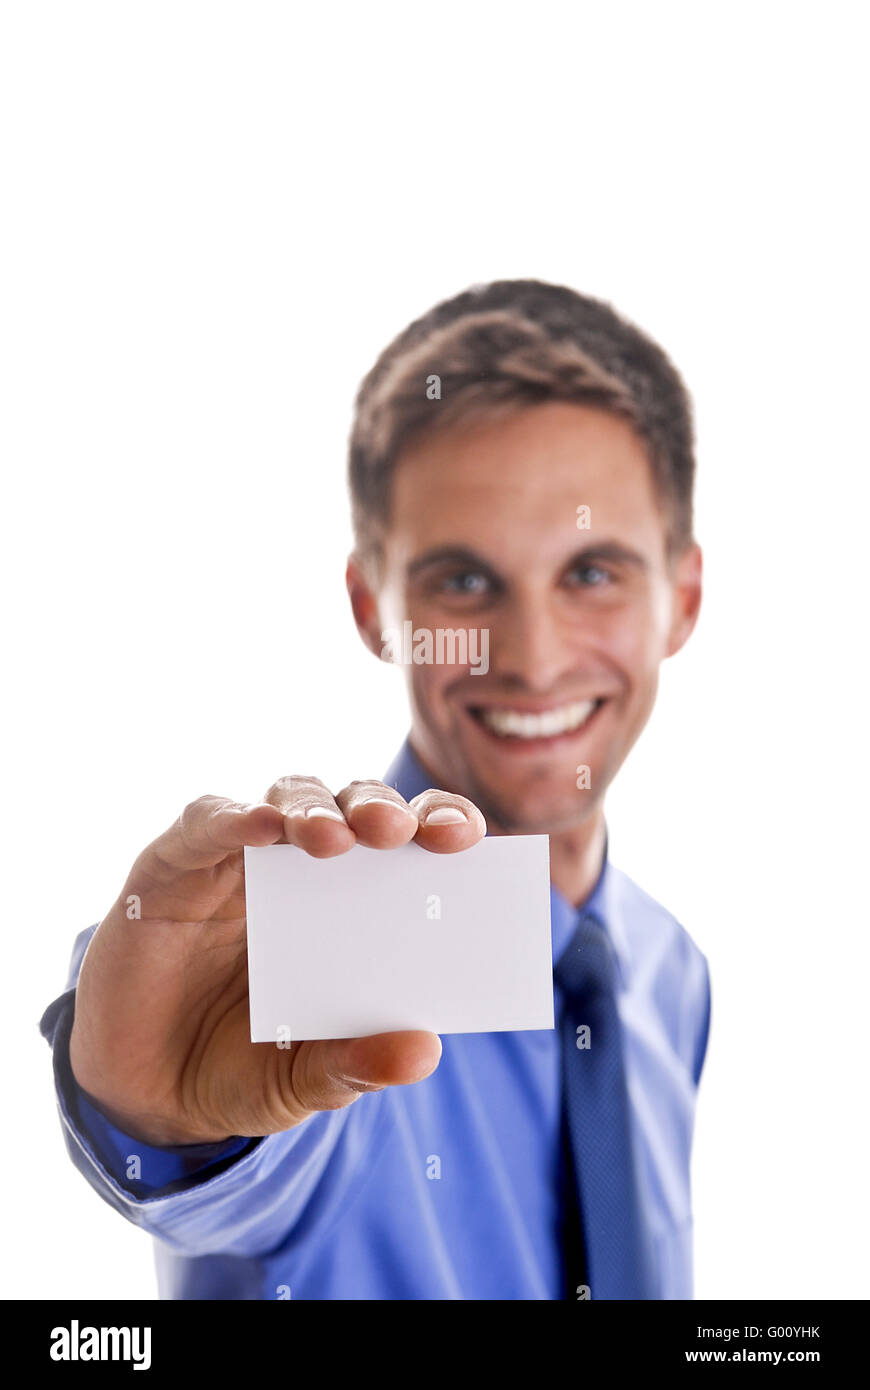 Business man holding business card in his hand Stock Photo